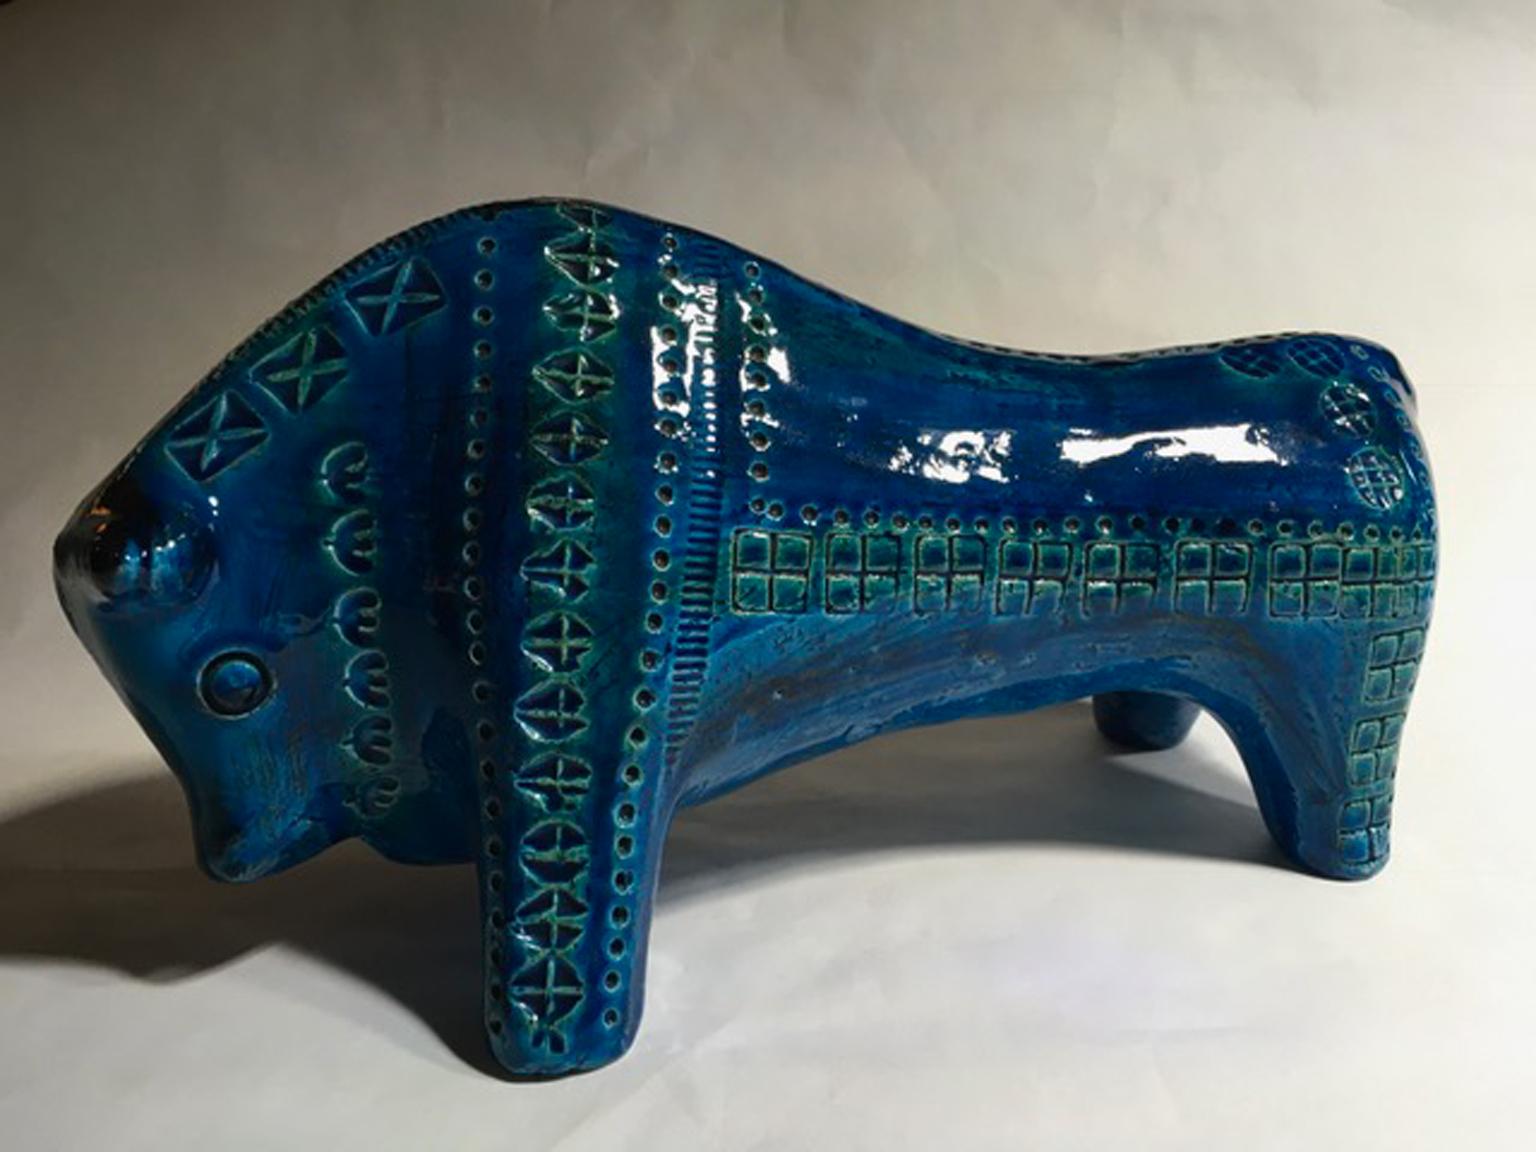 1980 Italian Post-Modern design bull in turquoise enameled ceramic with abstract drawings.

Piece colored in vibrant turquoise. Late 20th century Italian handmade production.
Surface engraved with geometric and abstract drawings.
 